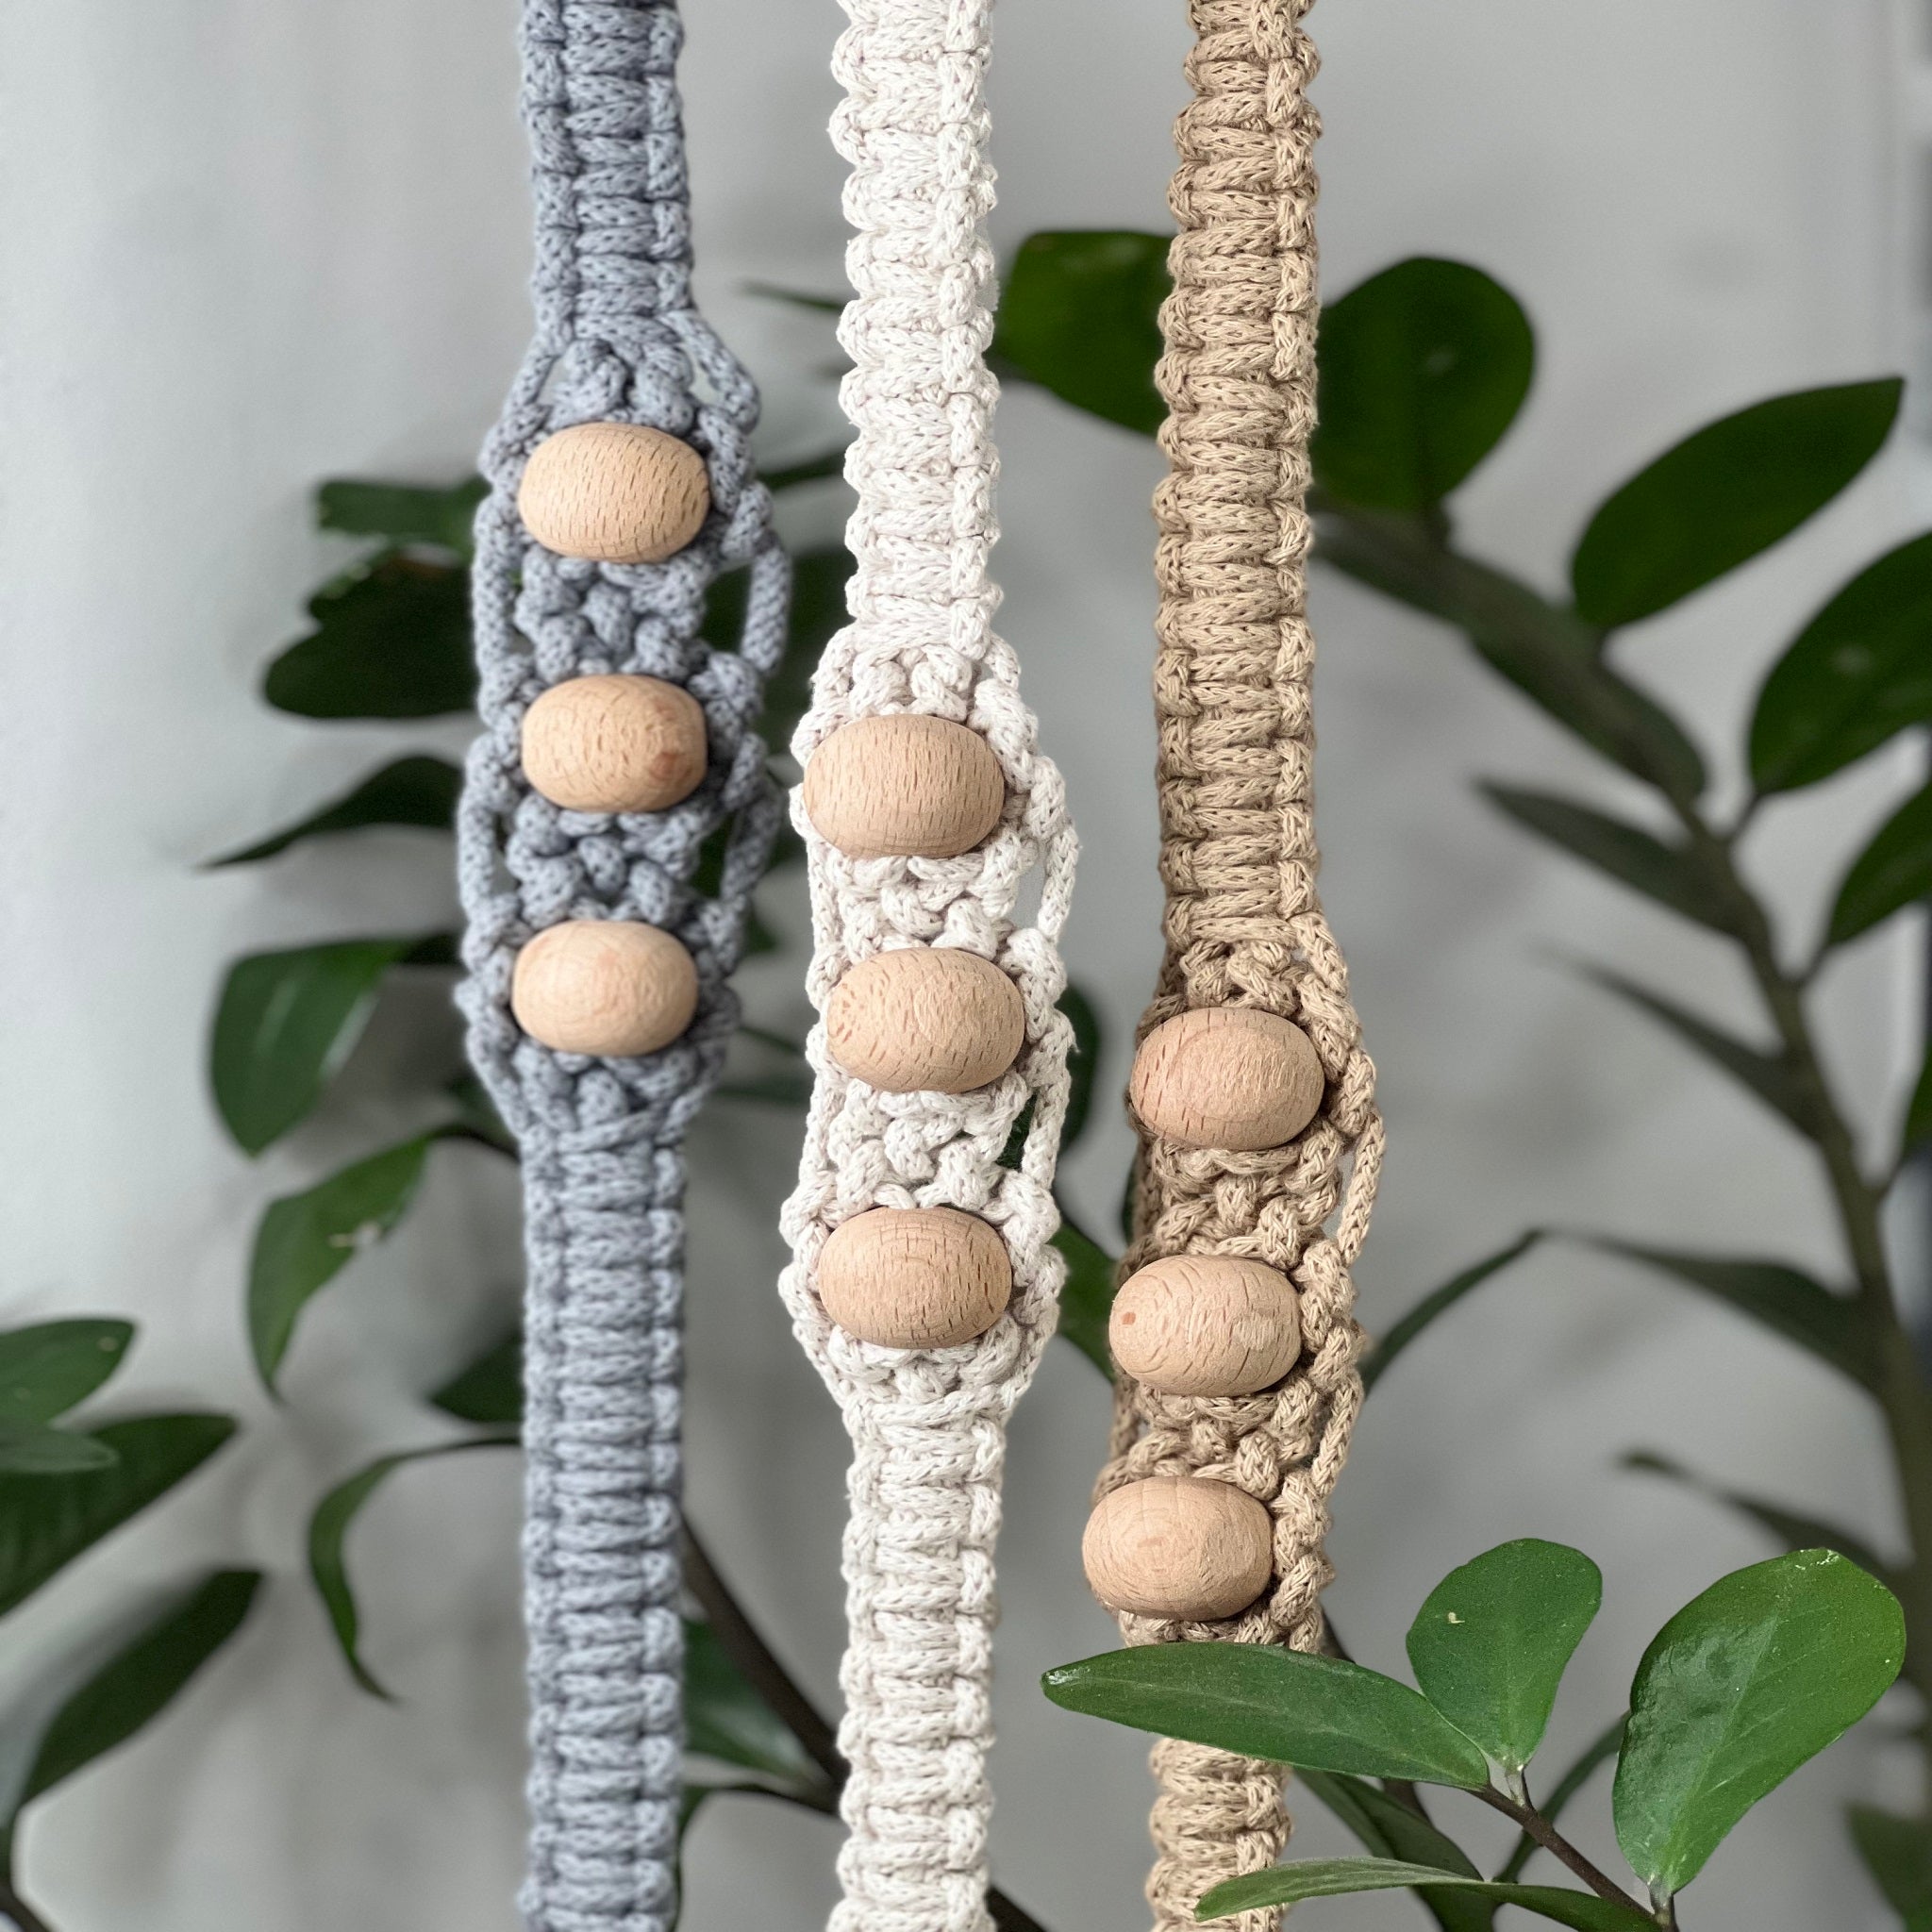 DVAAR YOGA MAT CARRIER STRAPS MACRAME YOGA MAT HOLDERS 100% COTTON WASHABLE ,TRENDY GIFT, HANDMADE AND AVAILABLE IN BEAUTIFUL LIGHT SHADES -WONDERFUL WHITE.